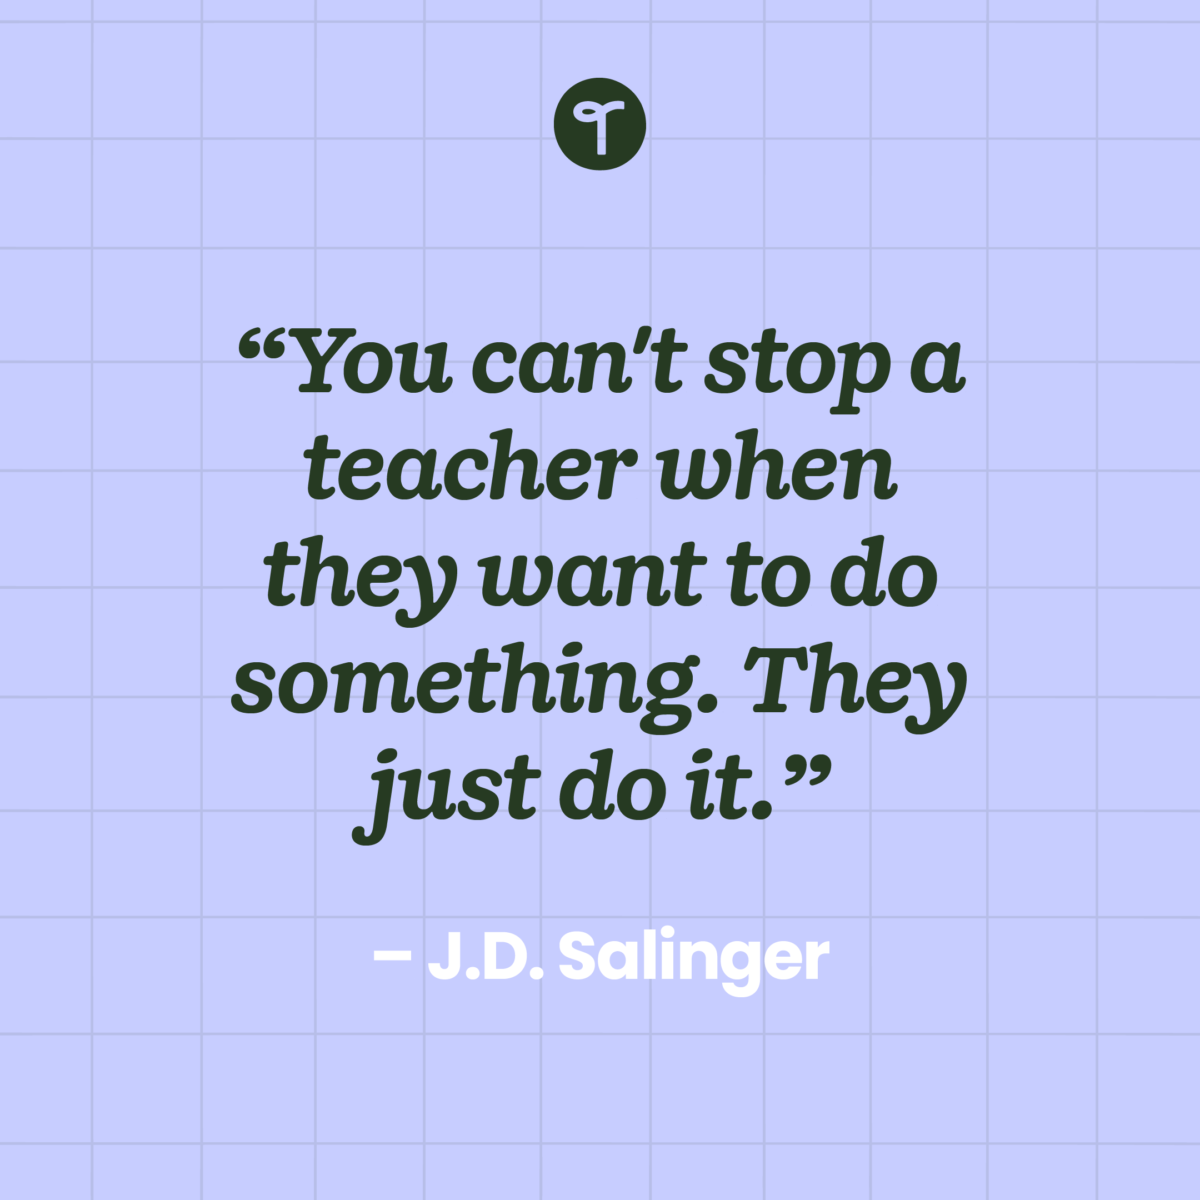 inspirational teacher quote “You can't stop a teacher when they want to do something. They just do it.” ― J.D. Salinger